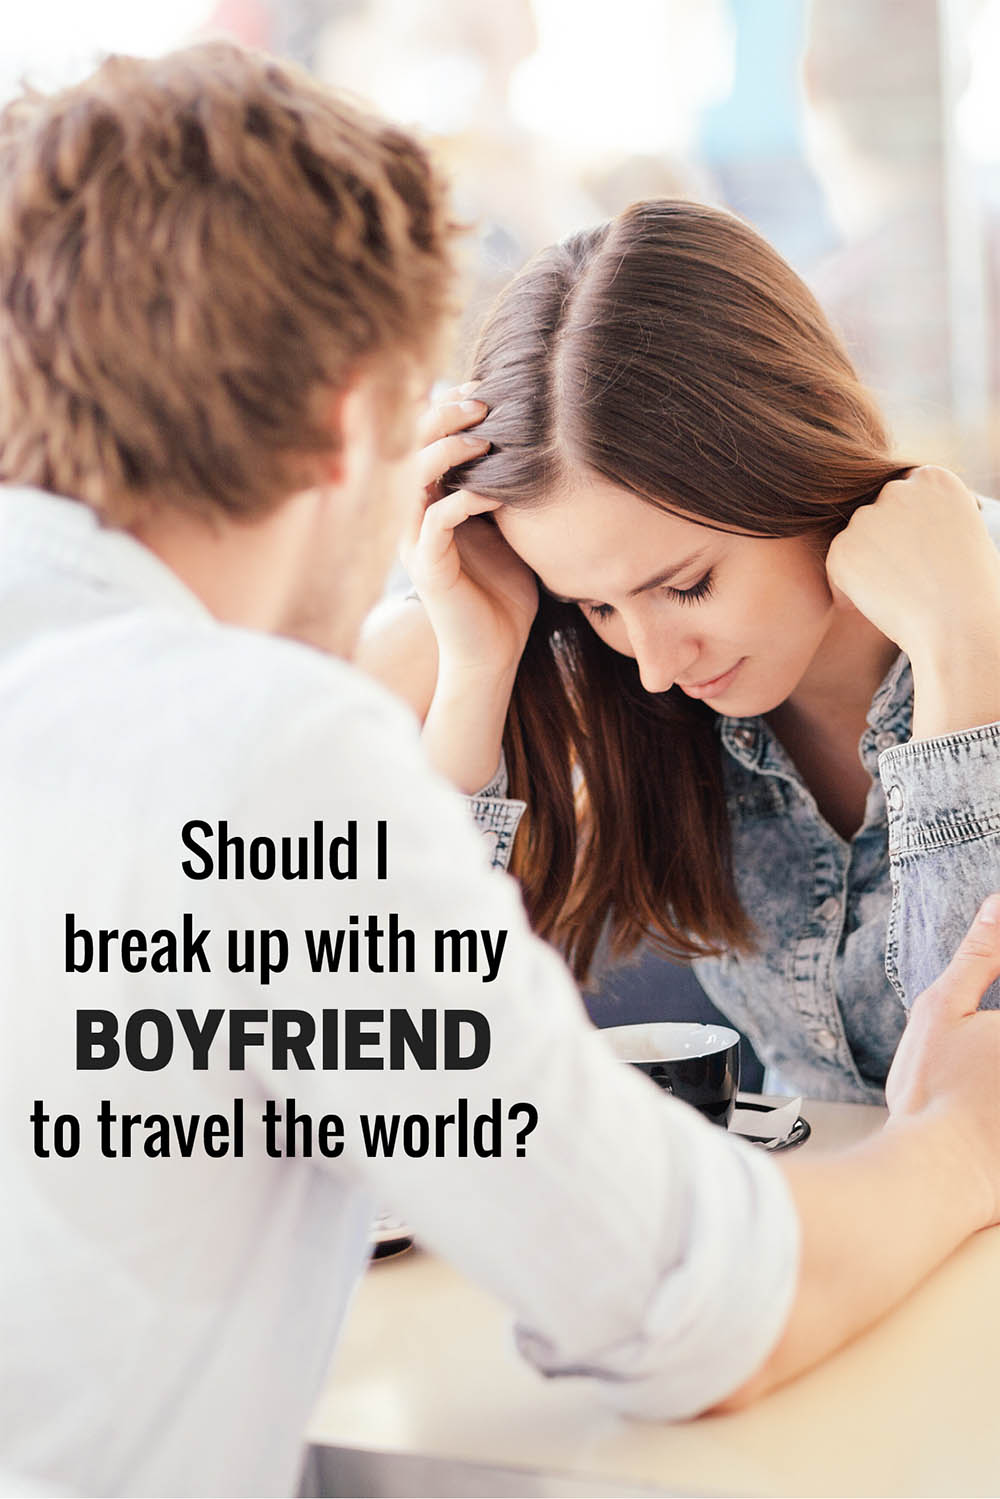 Should I break up with my boyfriend to travel the world?